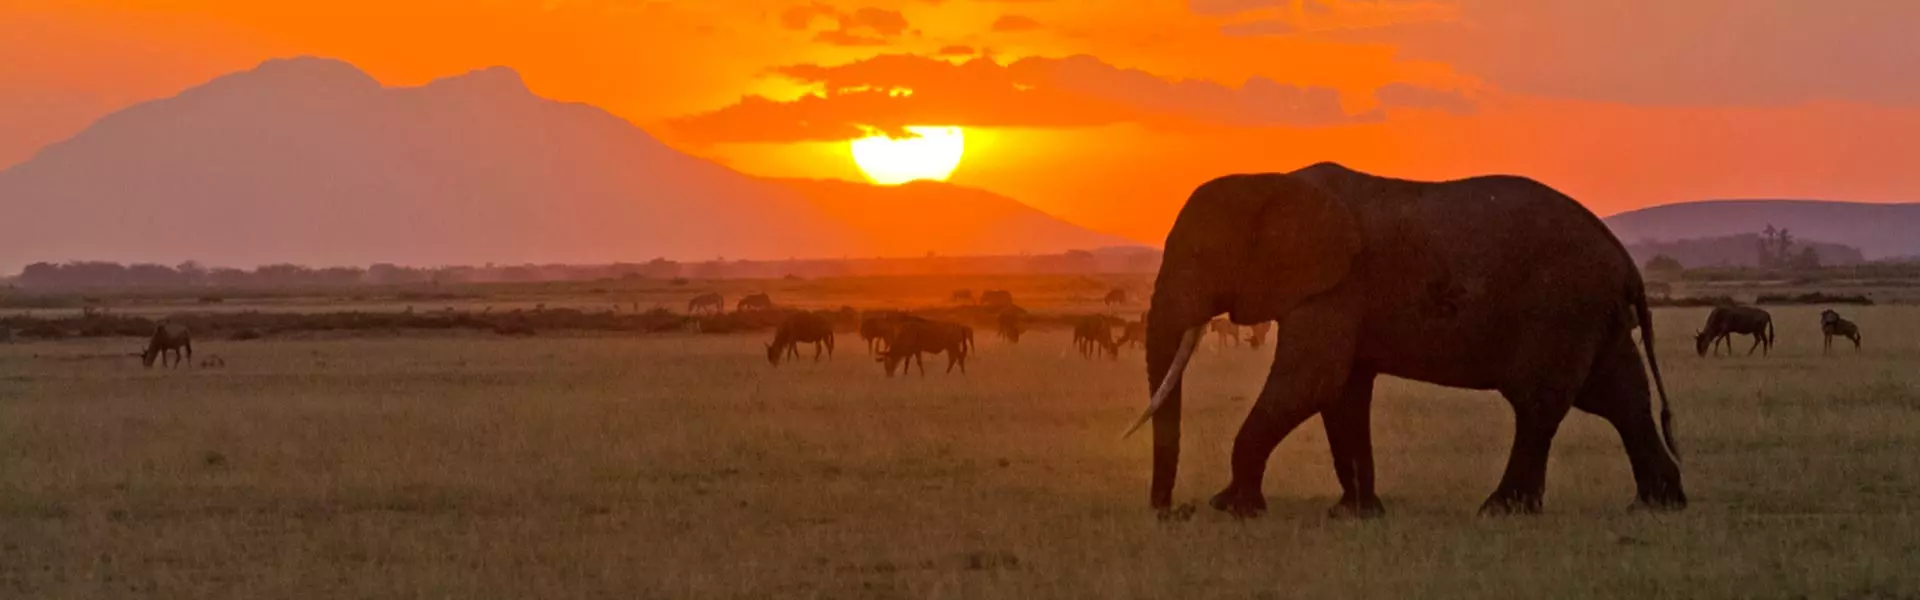 The view of sunset in Serengeti national park with wilderness.